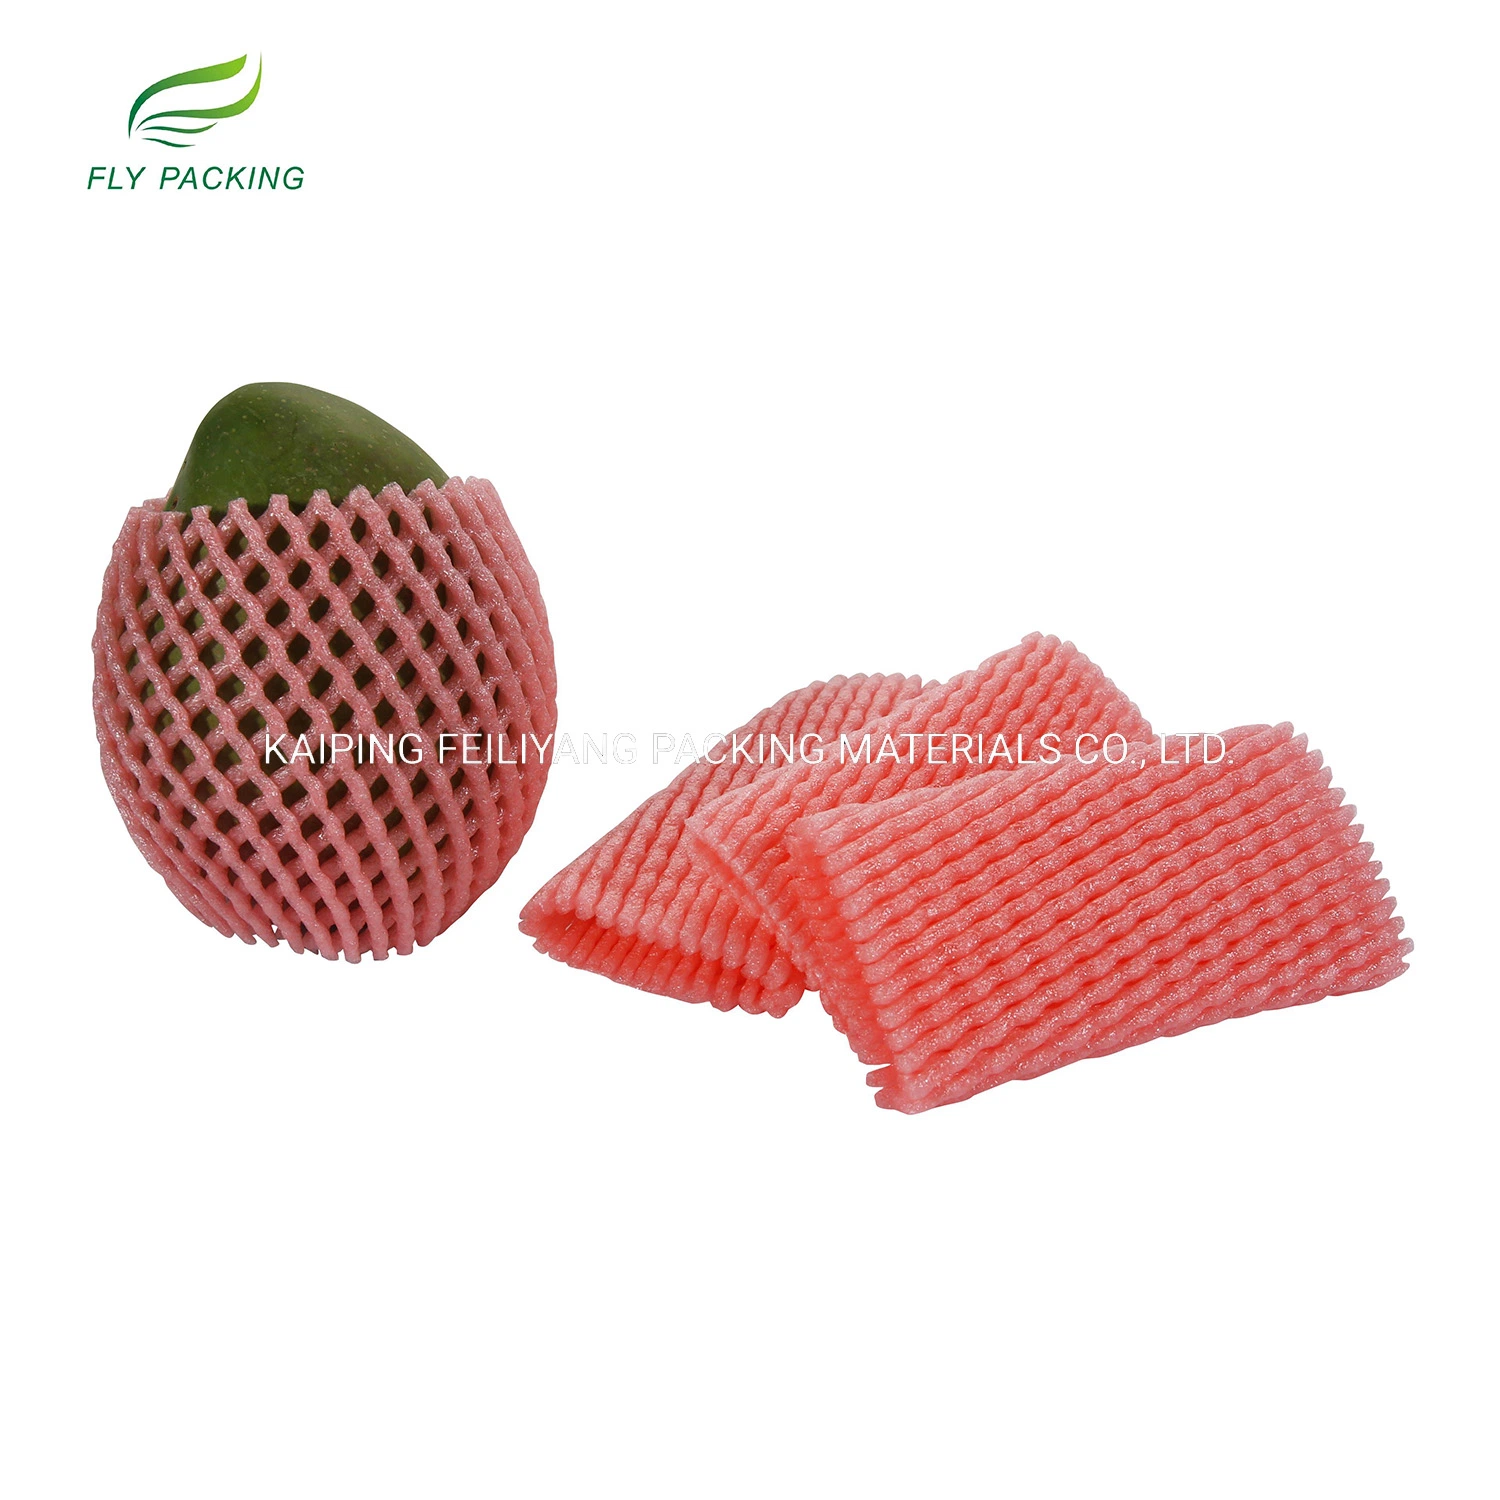 High quality/High cost performance  EPE Mango Protection Packing Material Fruit Foam Net